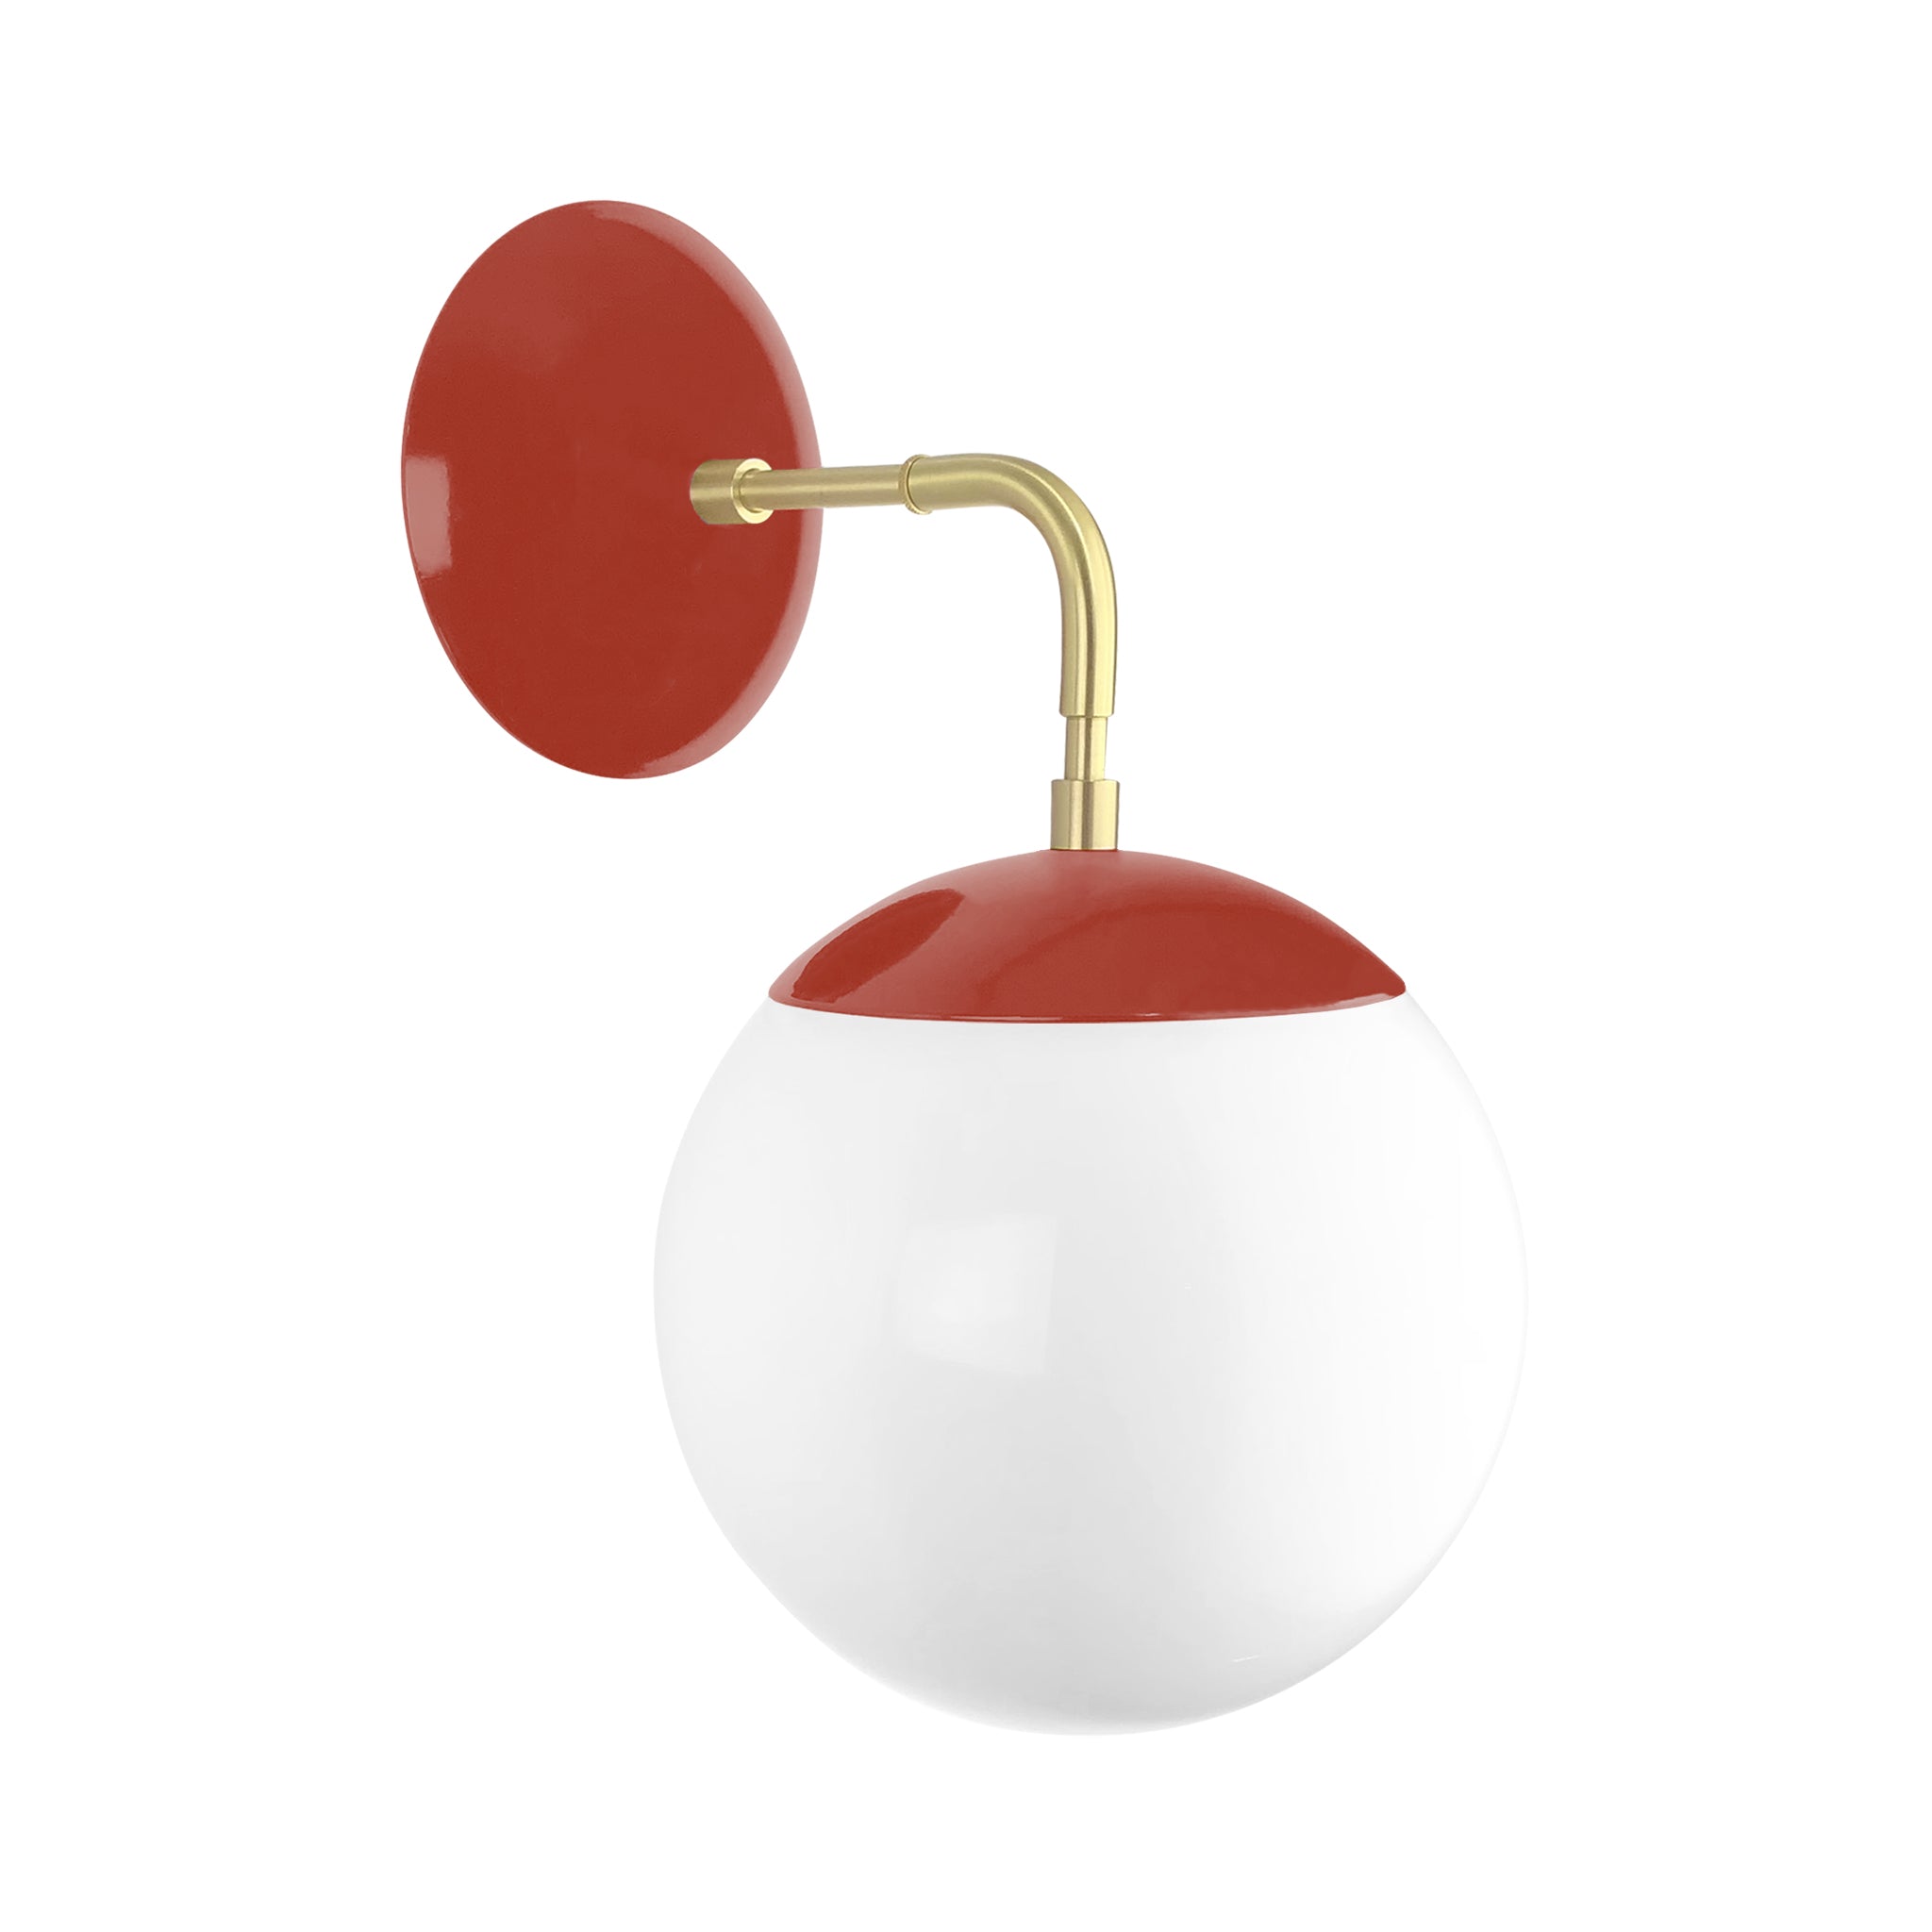 Brass and riding hood red color Cap sconce 8" Dutton Brown lighting